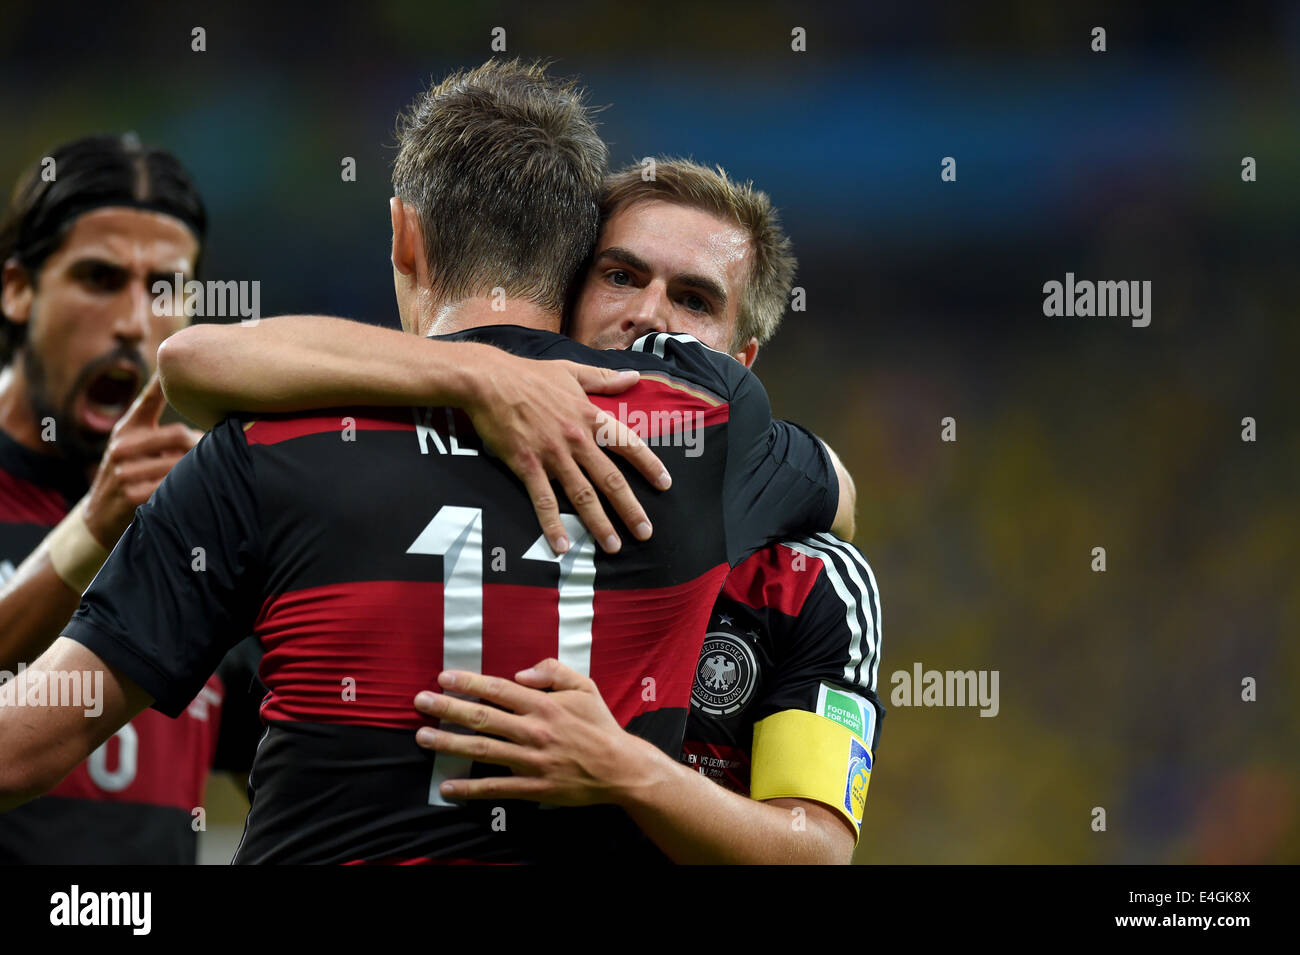 Belo Horizonte, Brazil. 8th July, 2014. (R-L) Philipp Lahm, Miroslav Klose (GER) Football/Soccer : Miroslav Klose of Germany celebrates with his teammates Philipp Lahm and Sami Khedira after scoring their second goal during the FIFA World Cup Brazil 2014 Semi-finals match between Brazil 1-7 Germany at Estadio Mineirao in Belo Horizonte, Brazil . © FAR EAST PRESS/AFLO/Alamy Live News Stock Photo